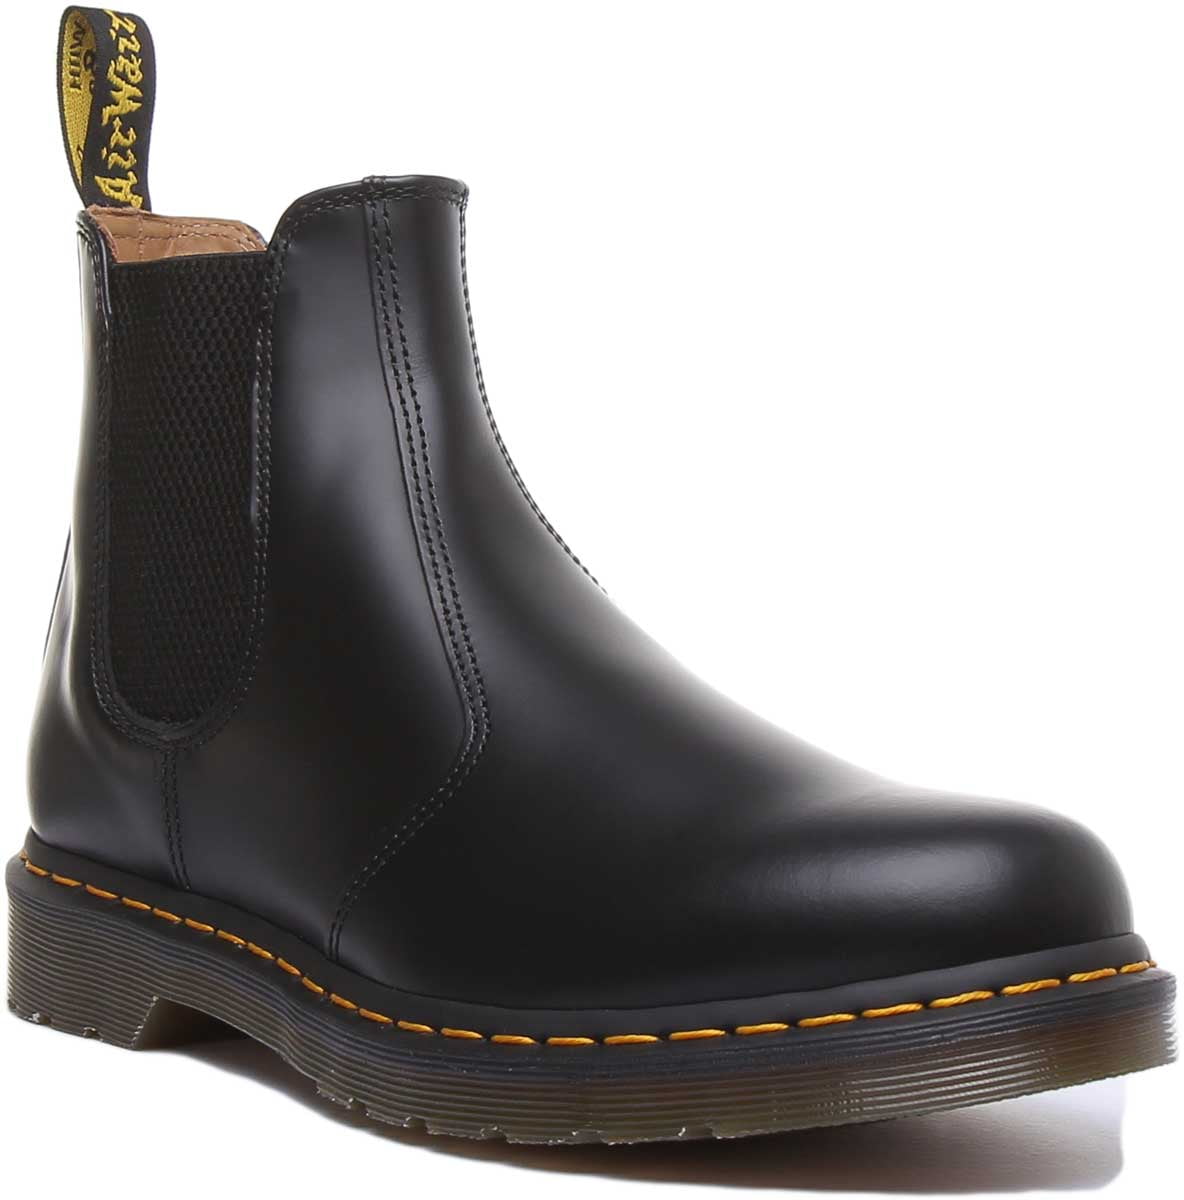 Dr. Martens, 2976 Leather Chelsea Boot for Men and Women - Walmart.com